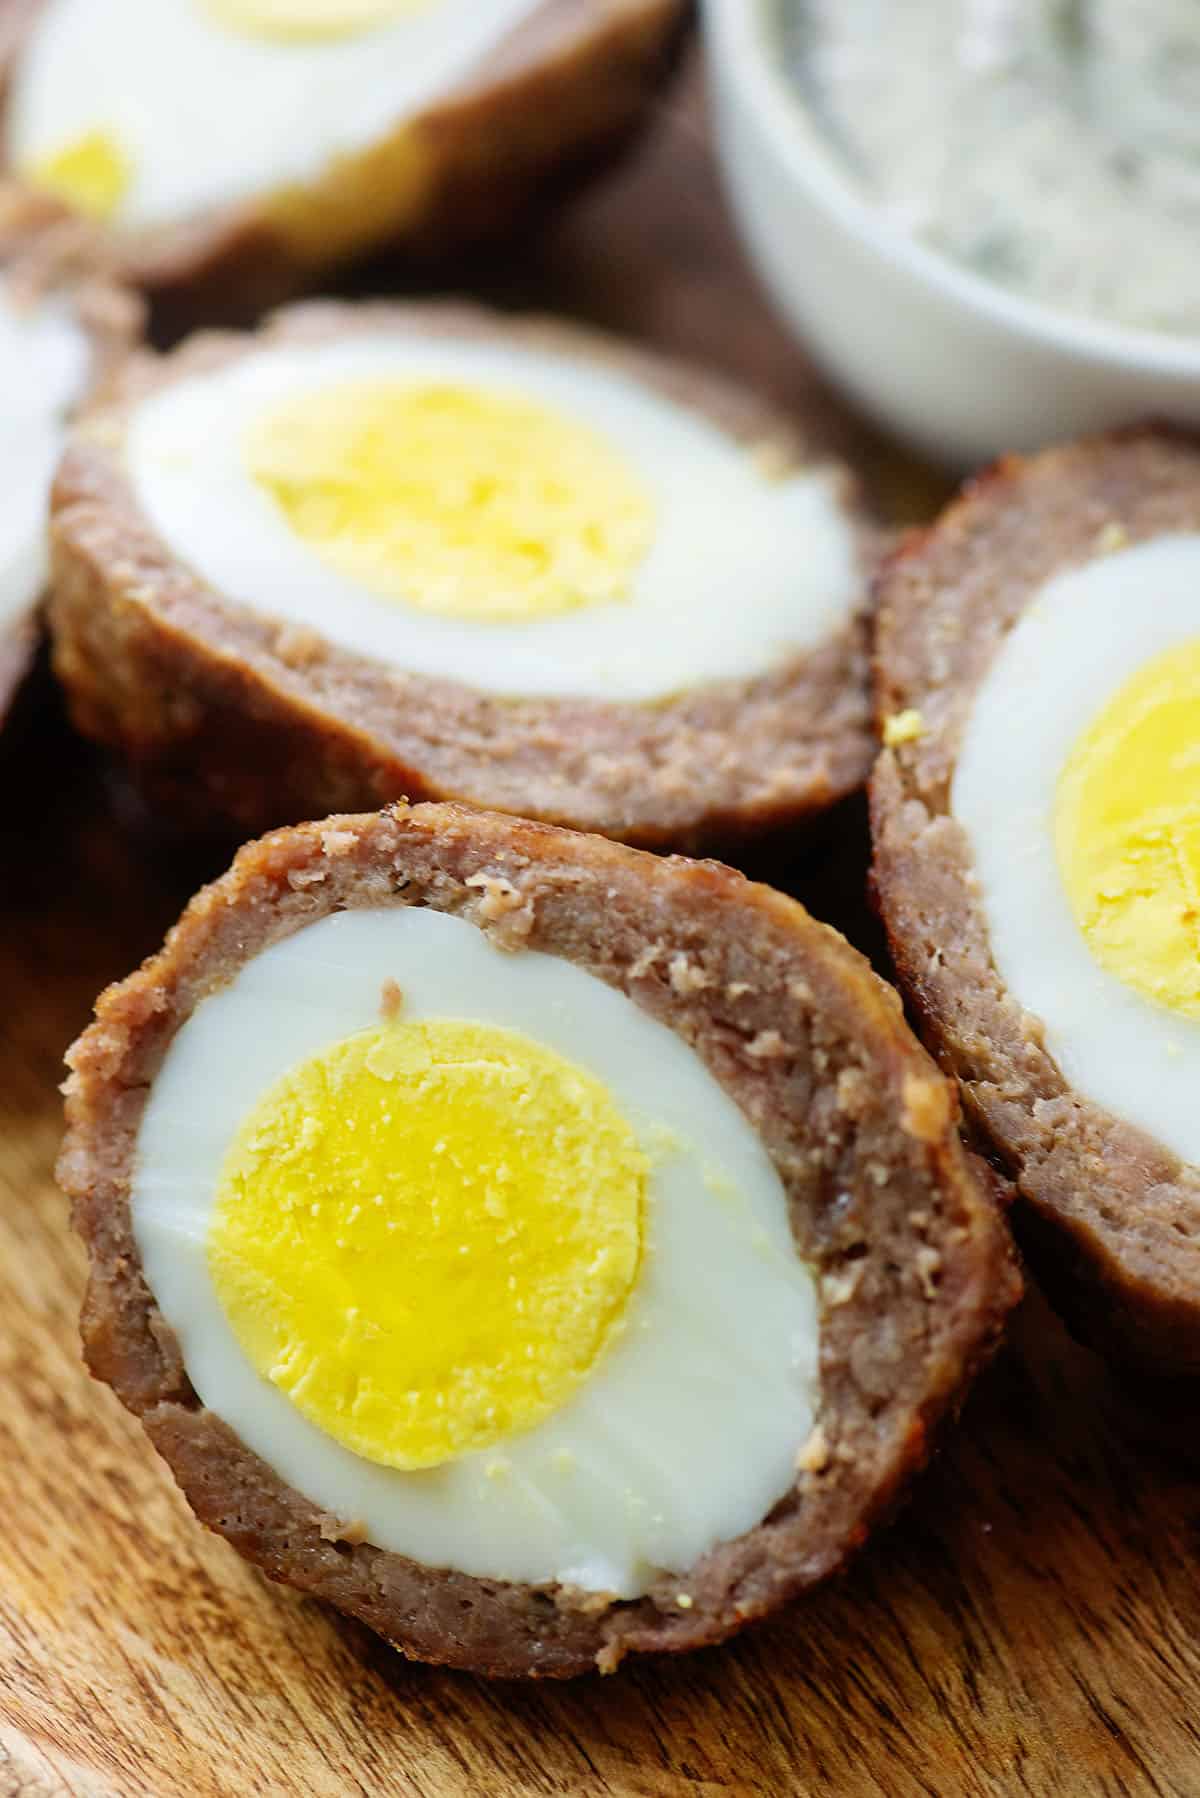 A close up view of keto scotch eggs sliced in half on a cutting board.